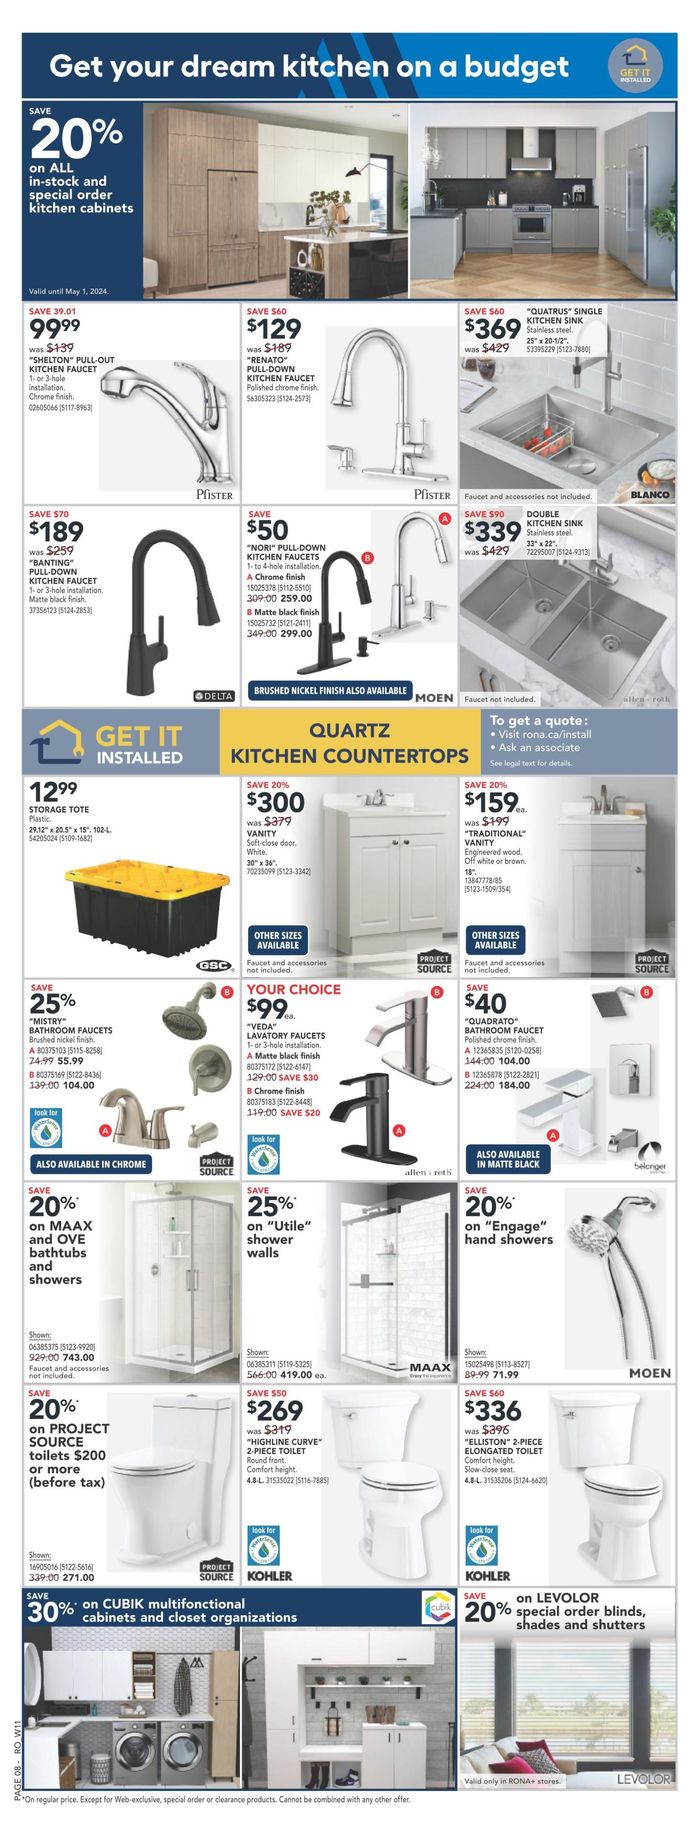 RONA catalogue in Fort McMurray | Start Spring For Less | 2024-04-18 - 2024-04-24